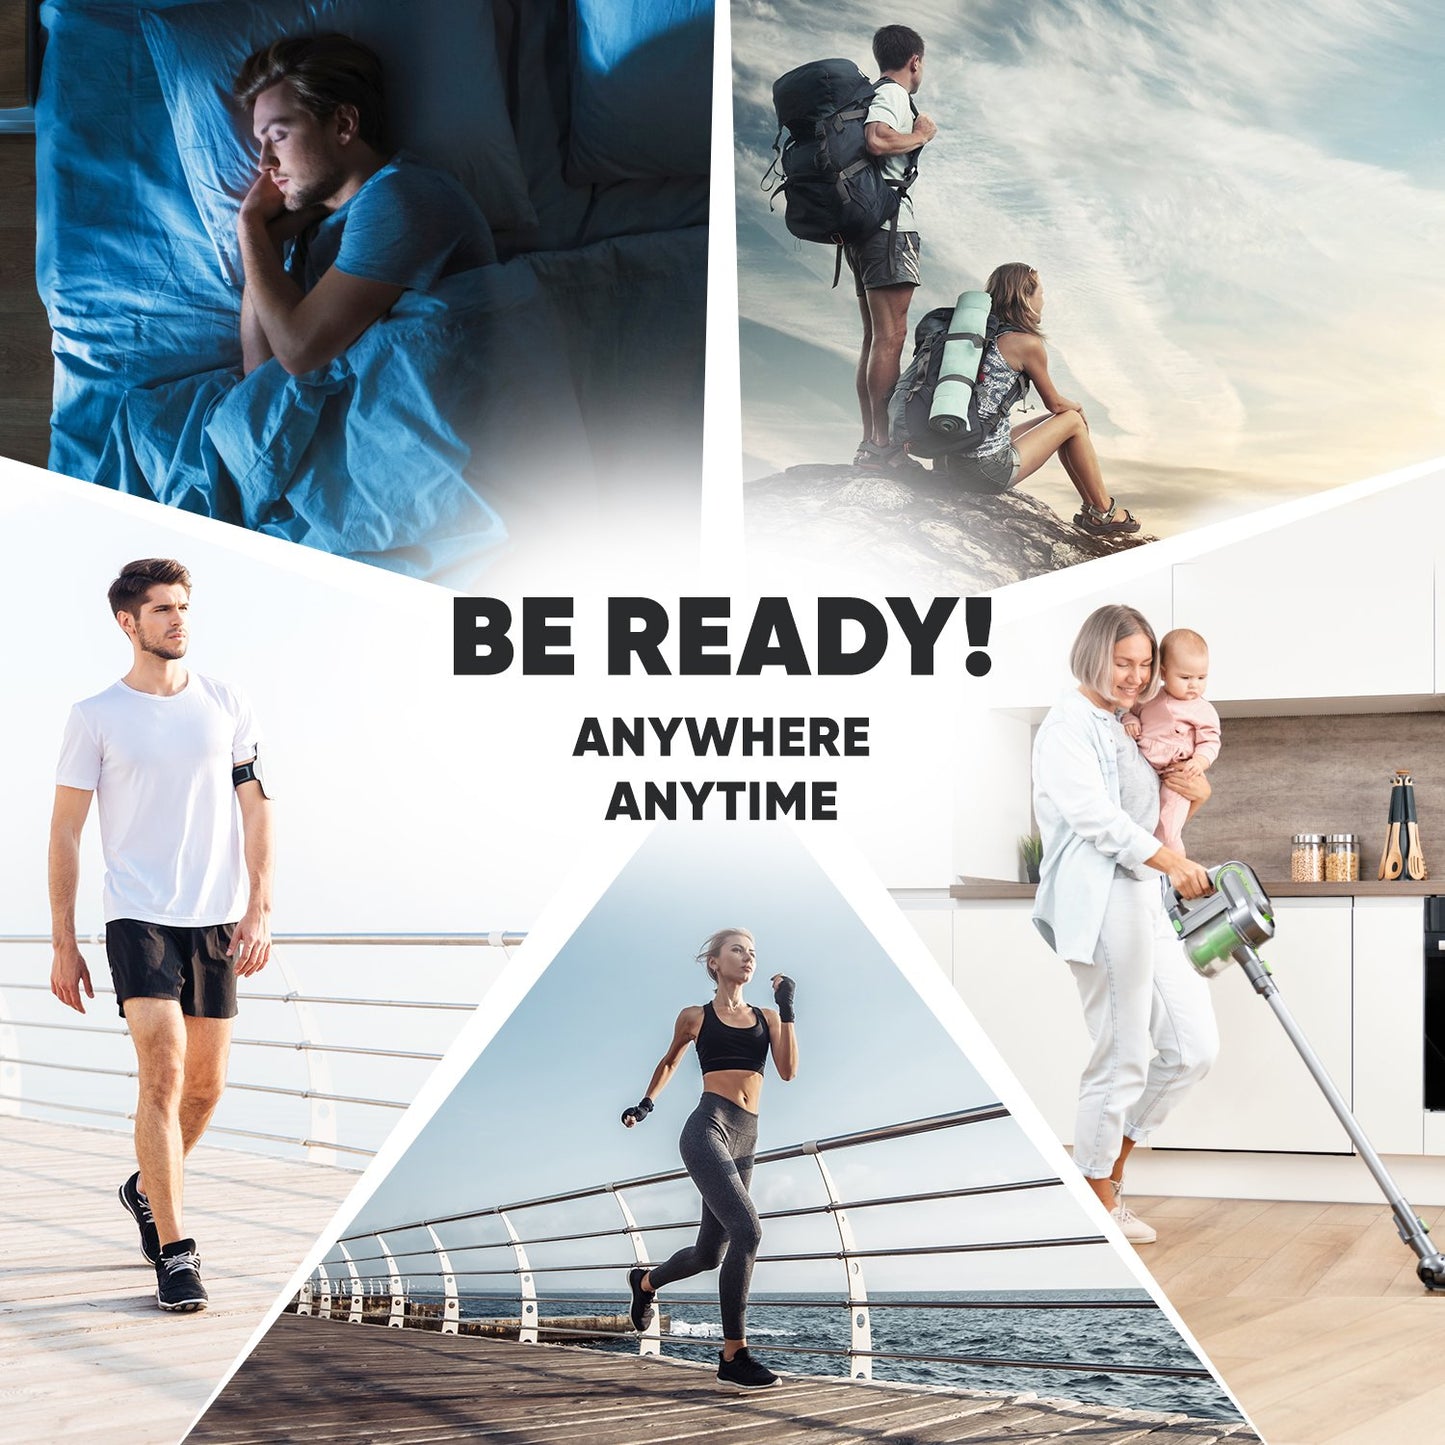 Five images of people in a collage, on is sleeping, on is hiking, one is cleanin, one is running, and one is walking. Center text reads, "Be Ready! Anywhere, anytime."